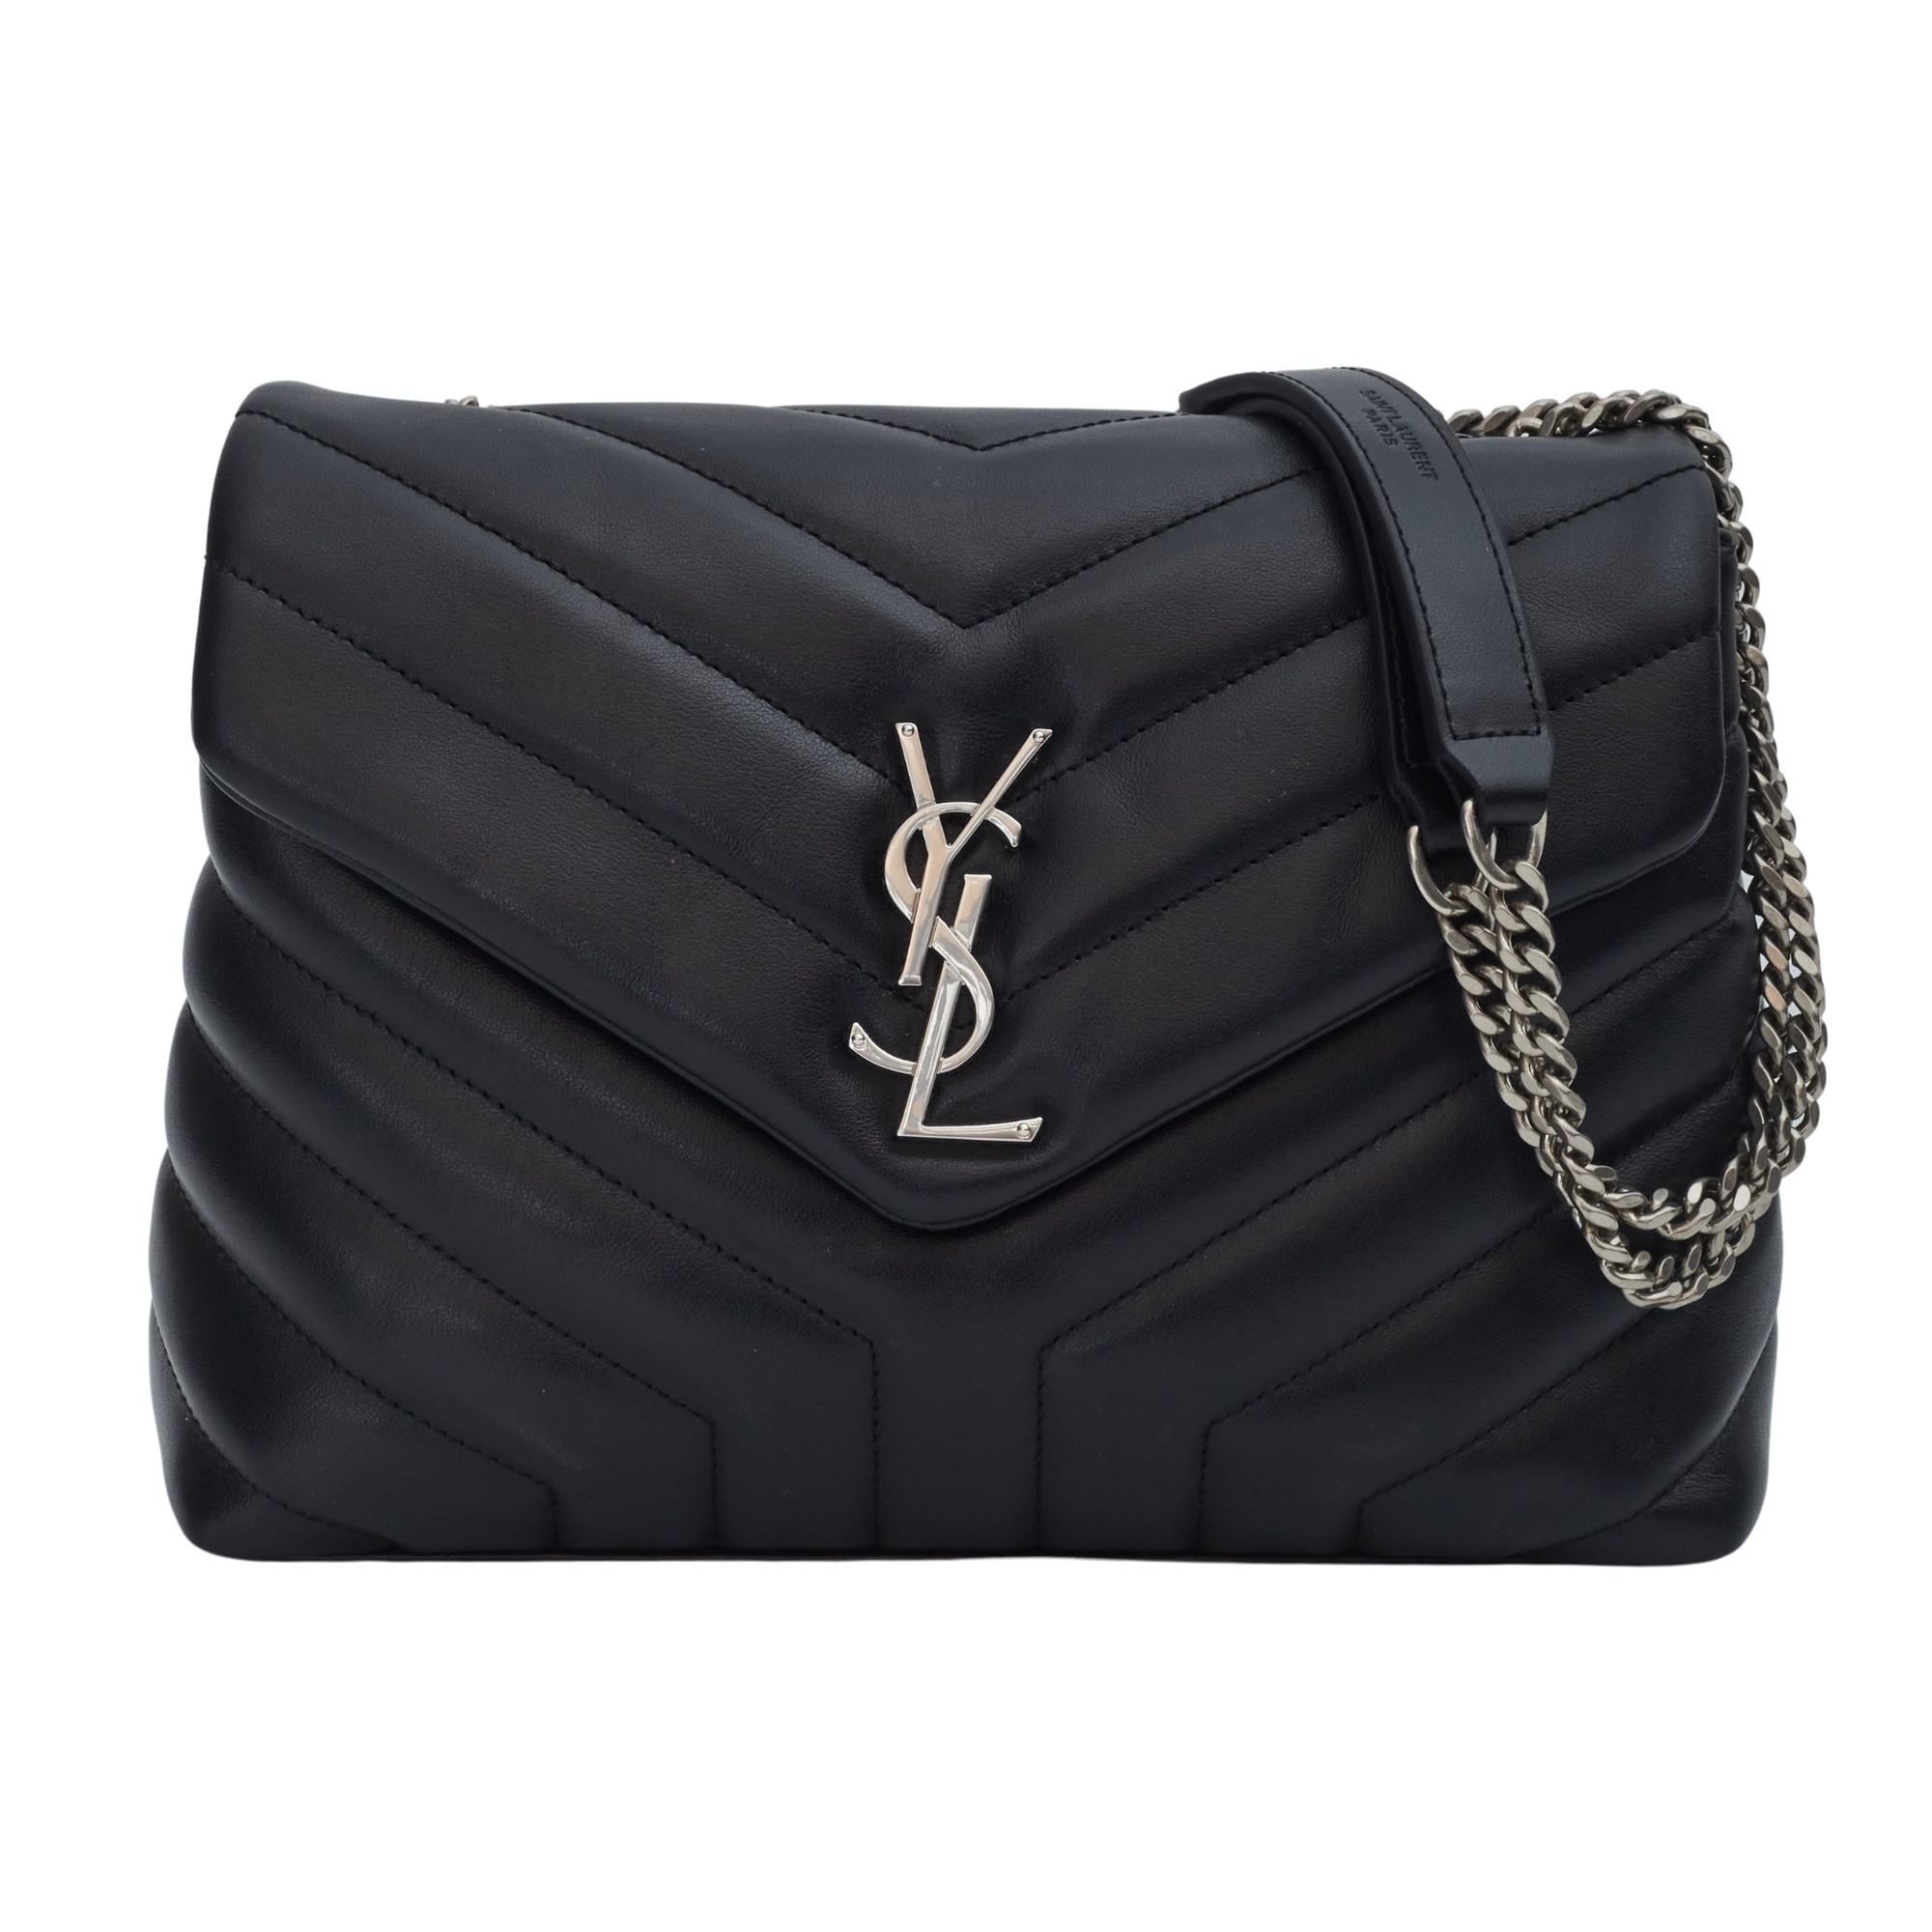 SAINT LAURENT LOULOU SMALL CLASSIC BLACK LEATHER SILVER HARDWARE BAG